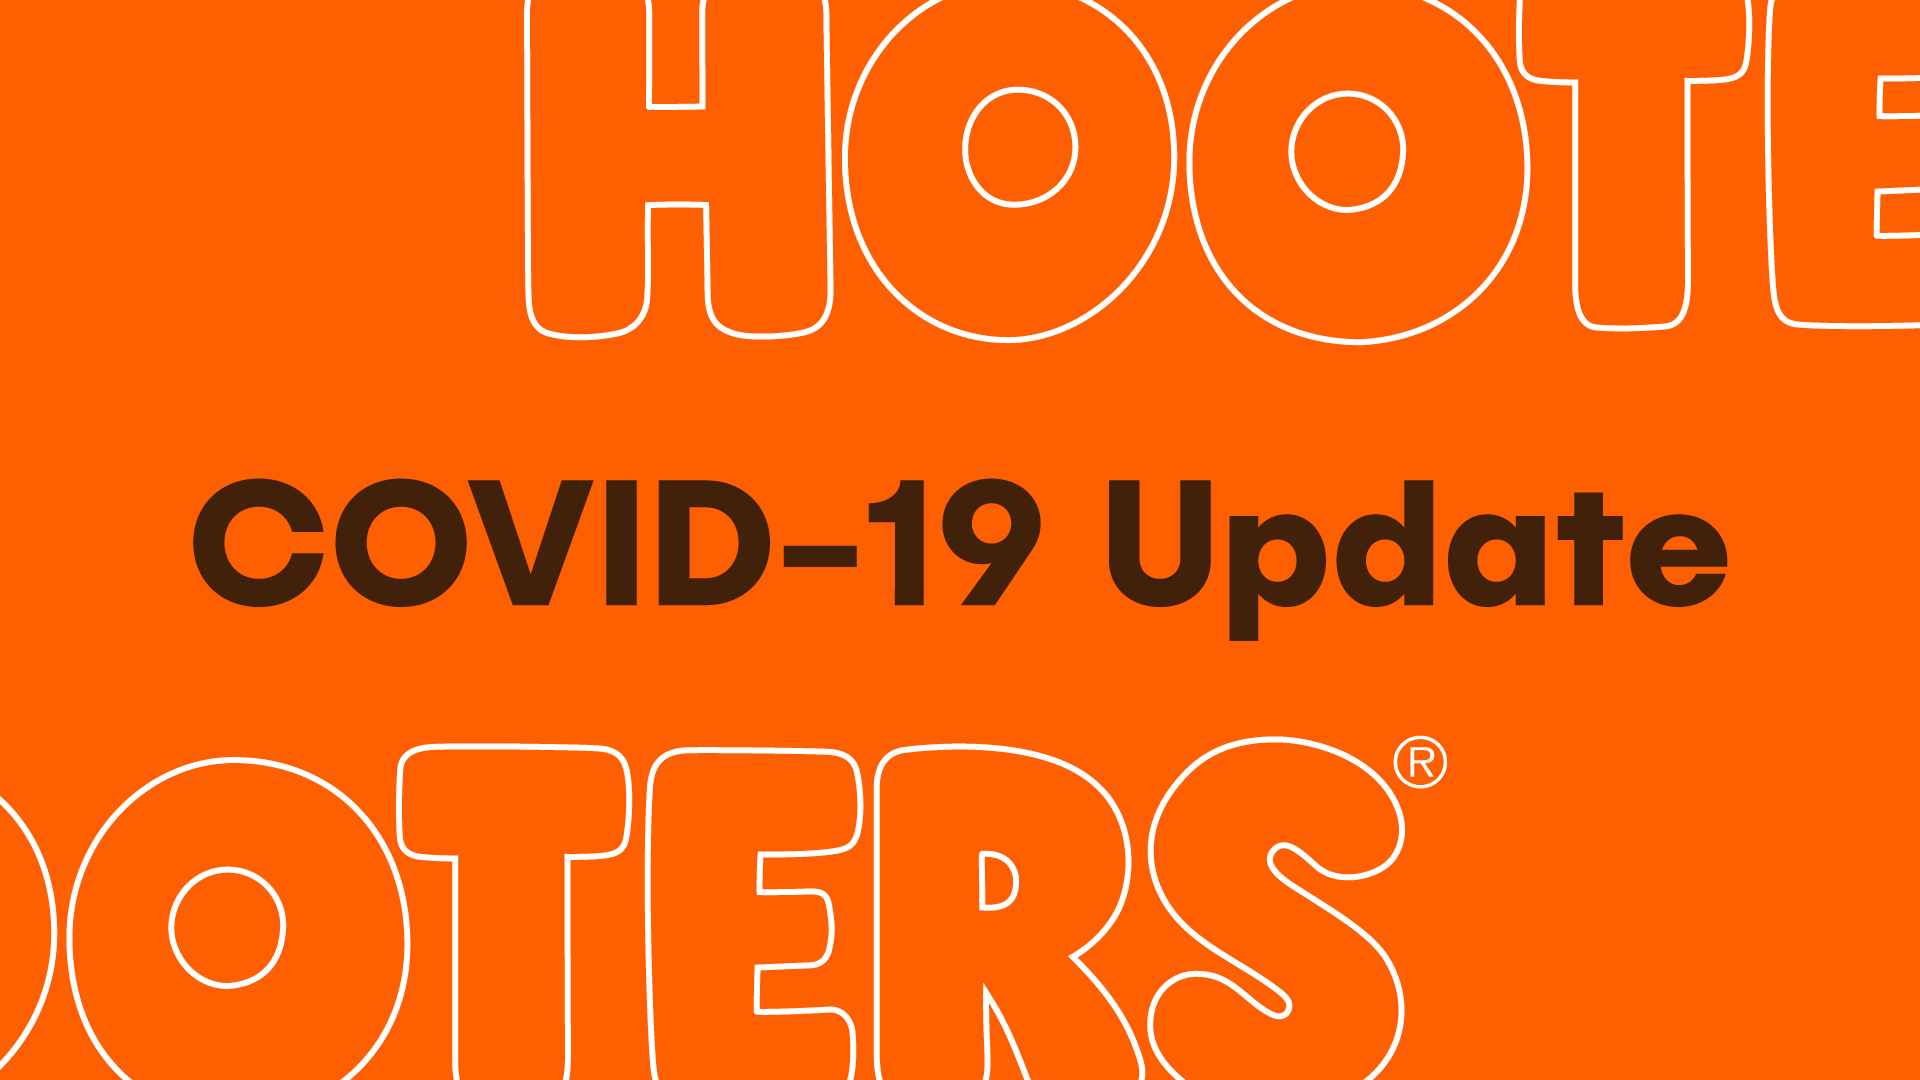 Hooters COVID-19 Update